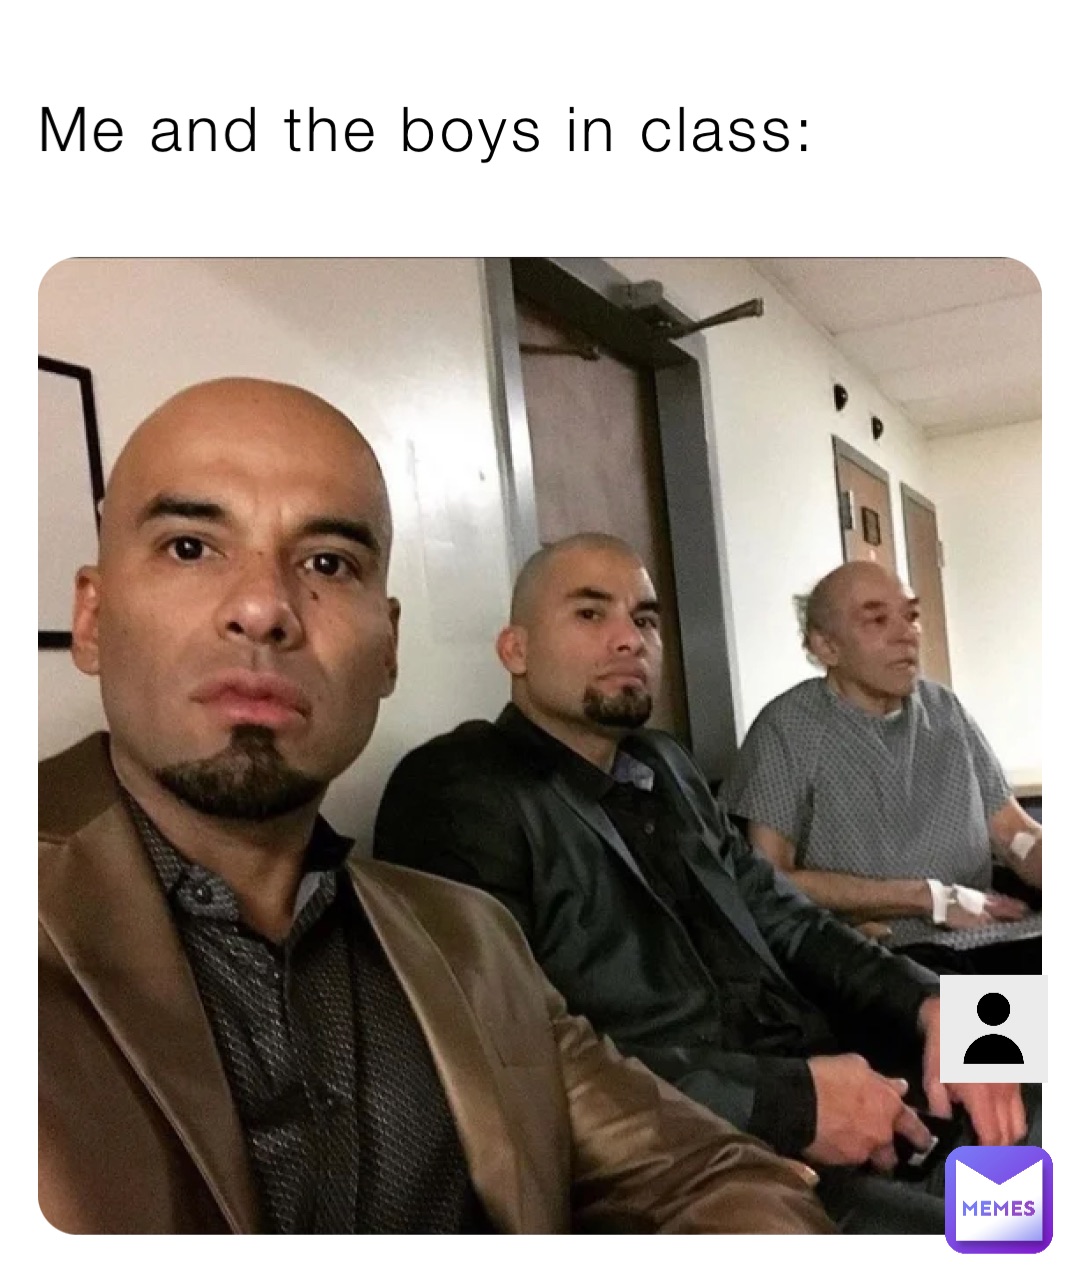 Me and the boys in class: